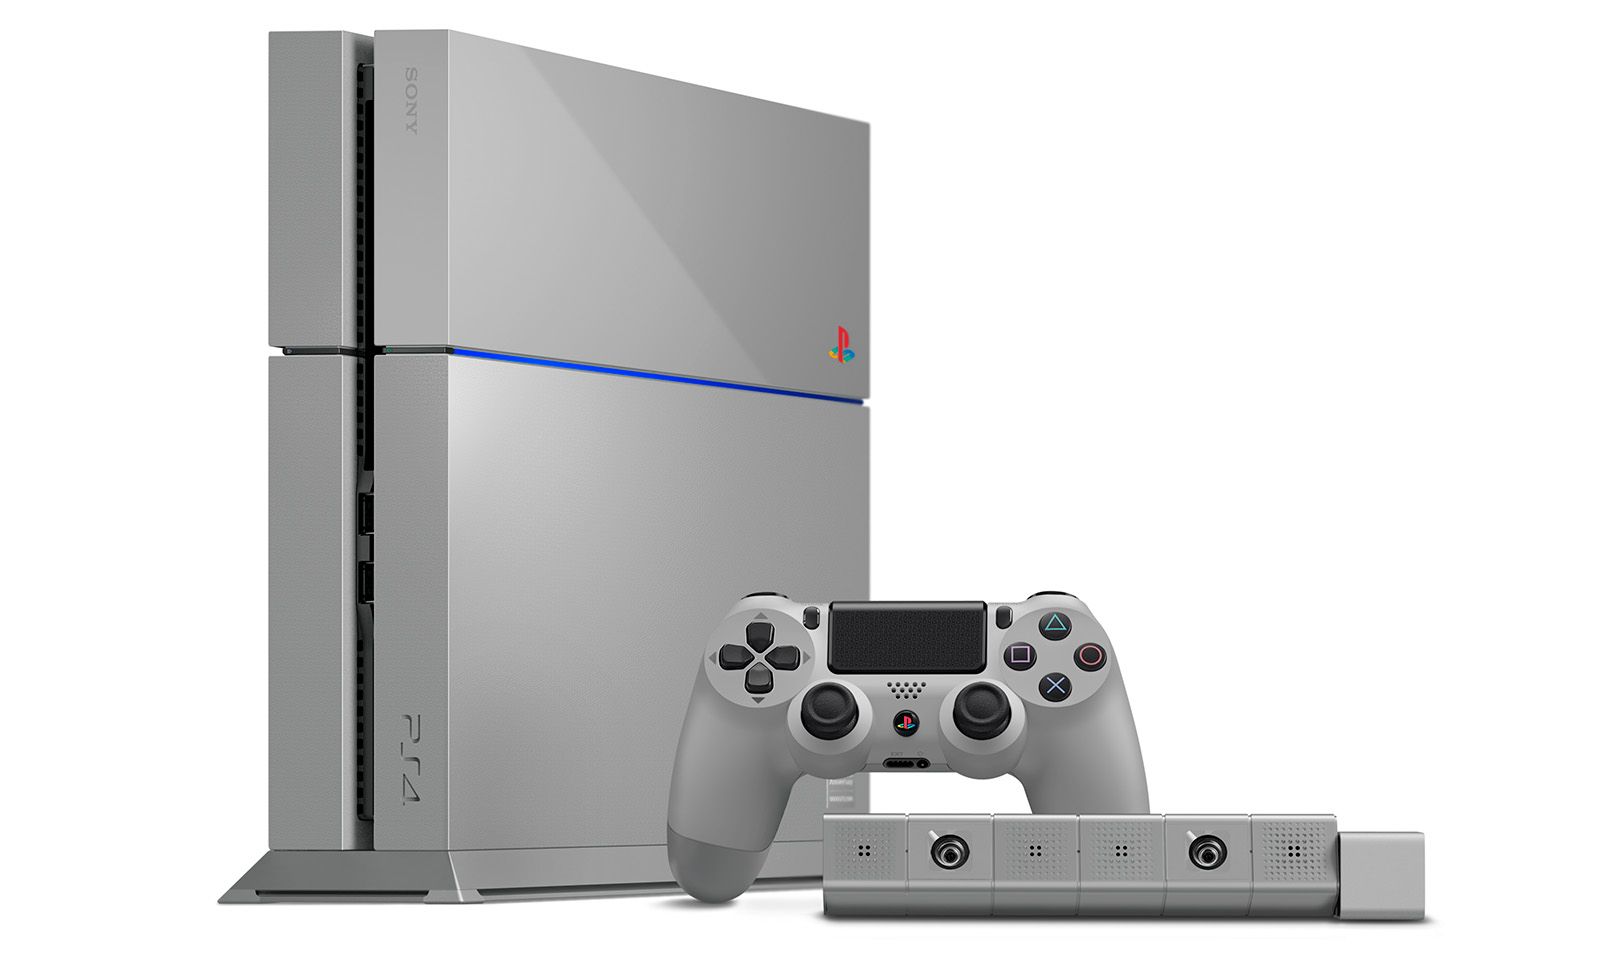 sony s limited edition original gray ps4 might be sold out in the us but uk fans will be able to buy one soon image 1